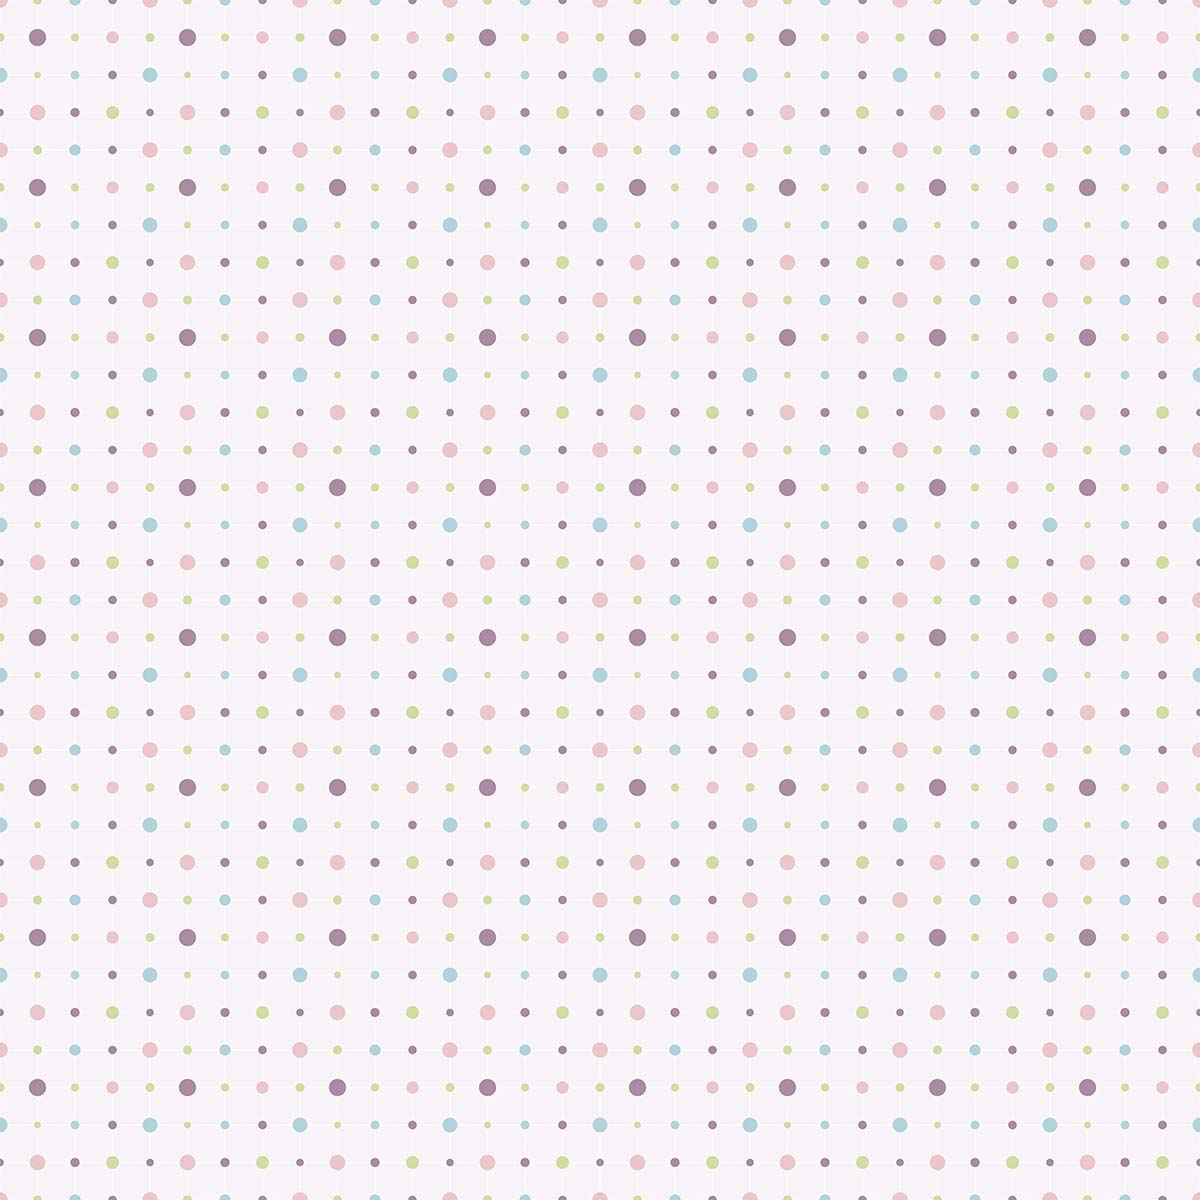 A pattern of colorful dots